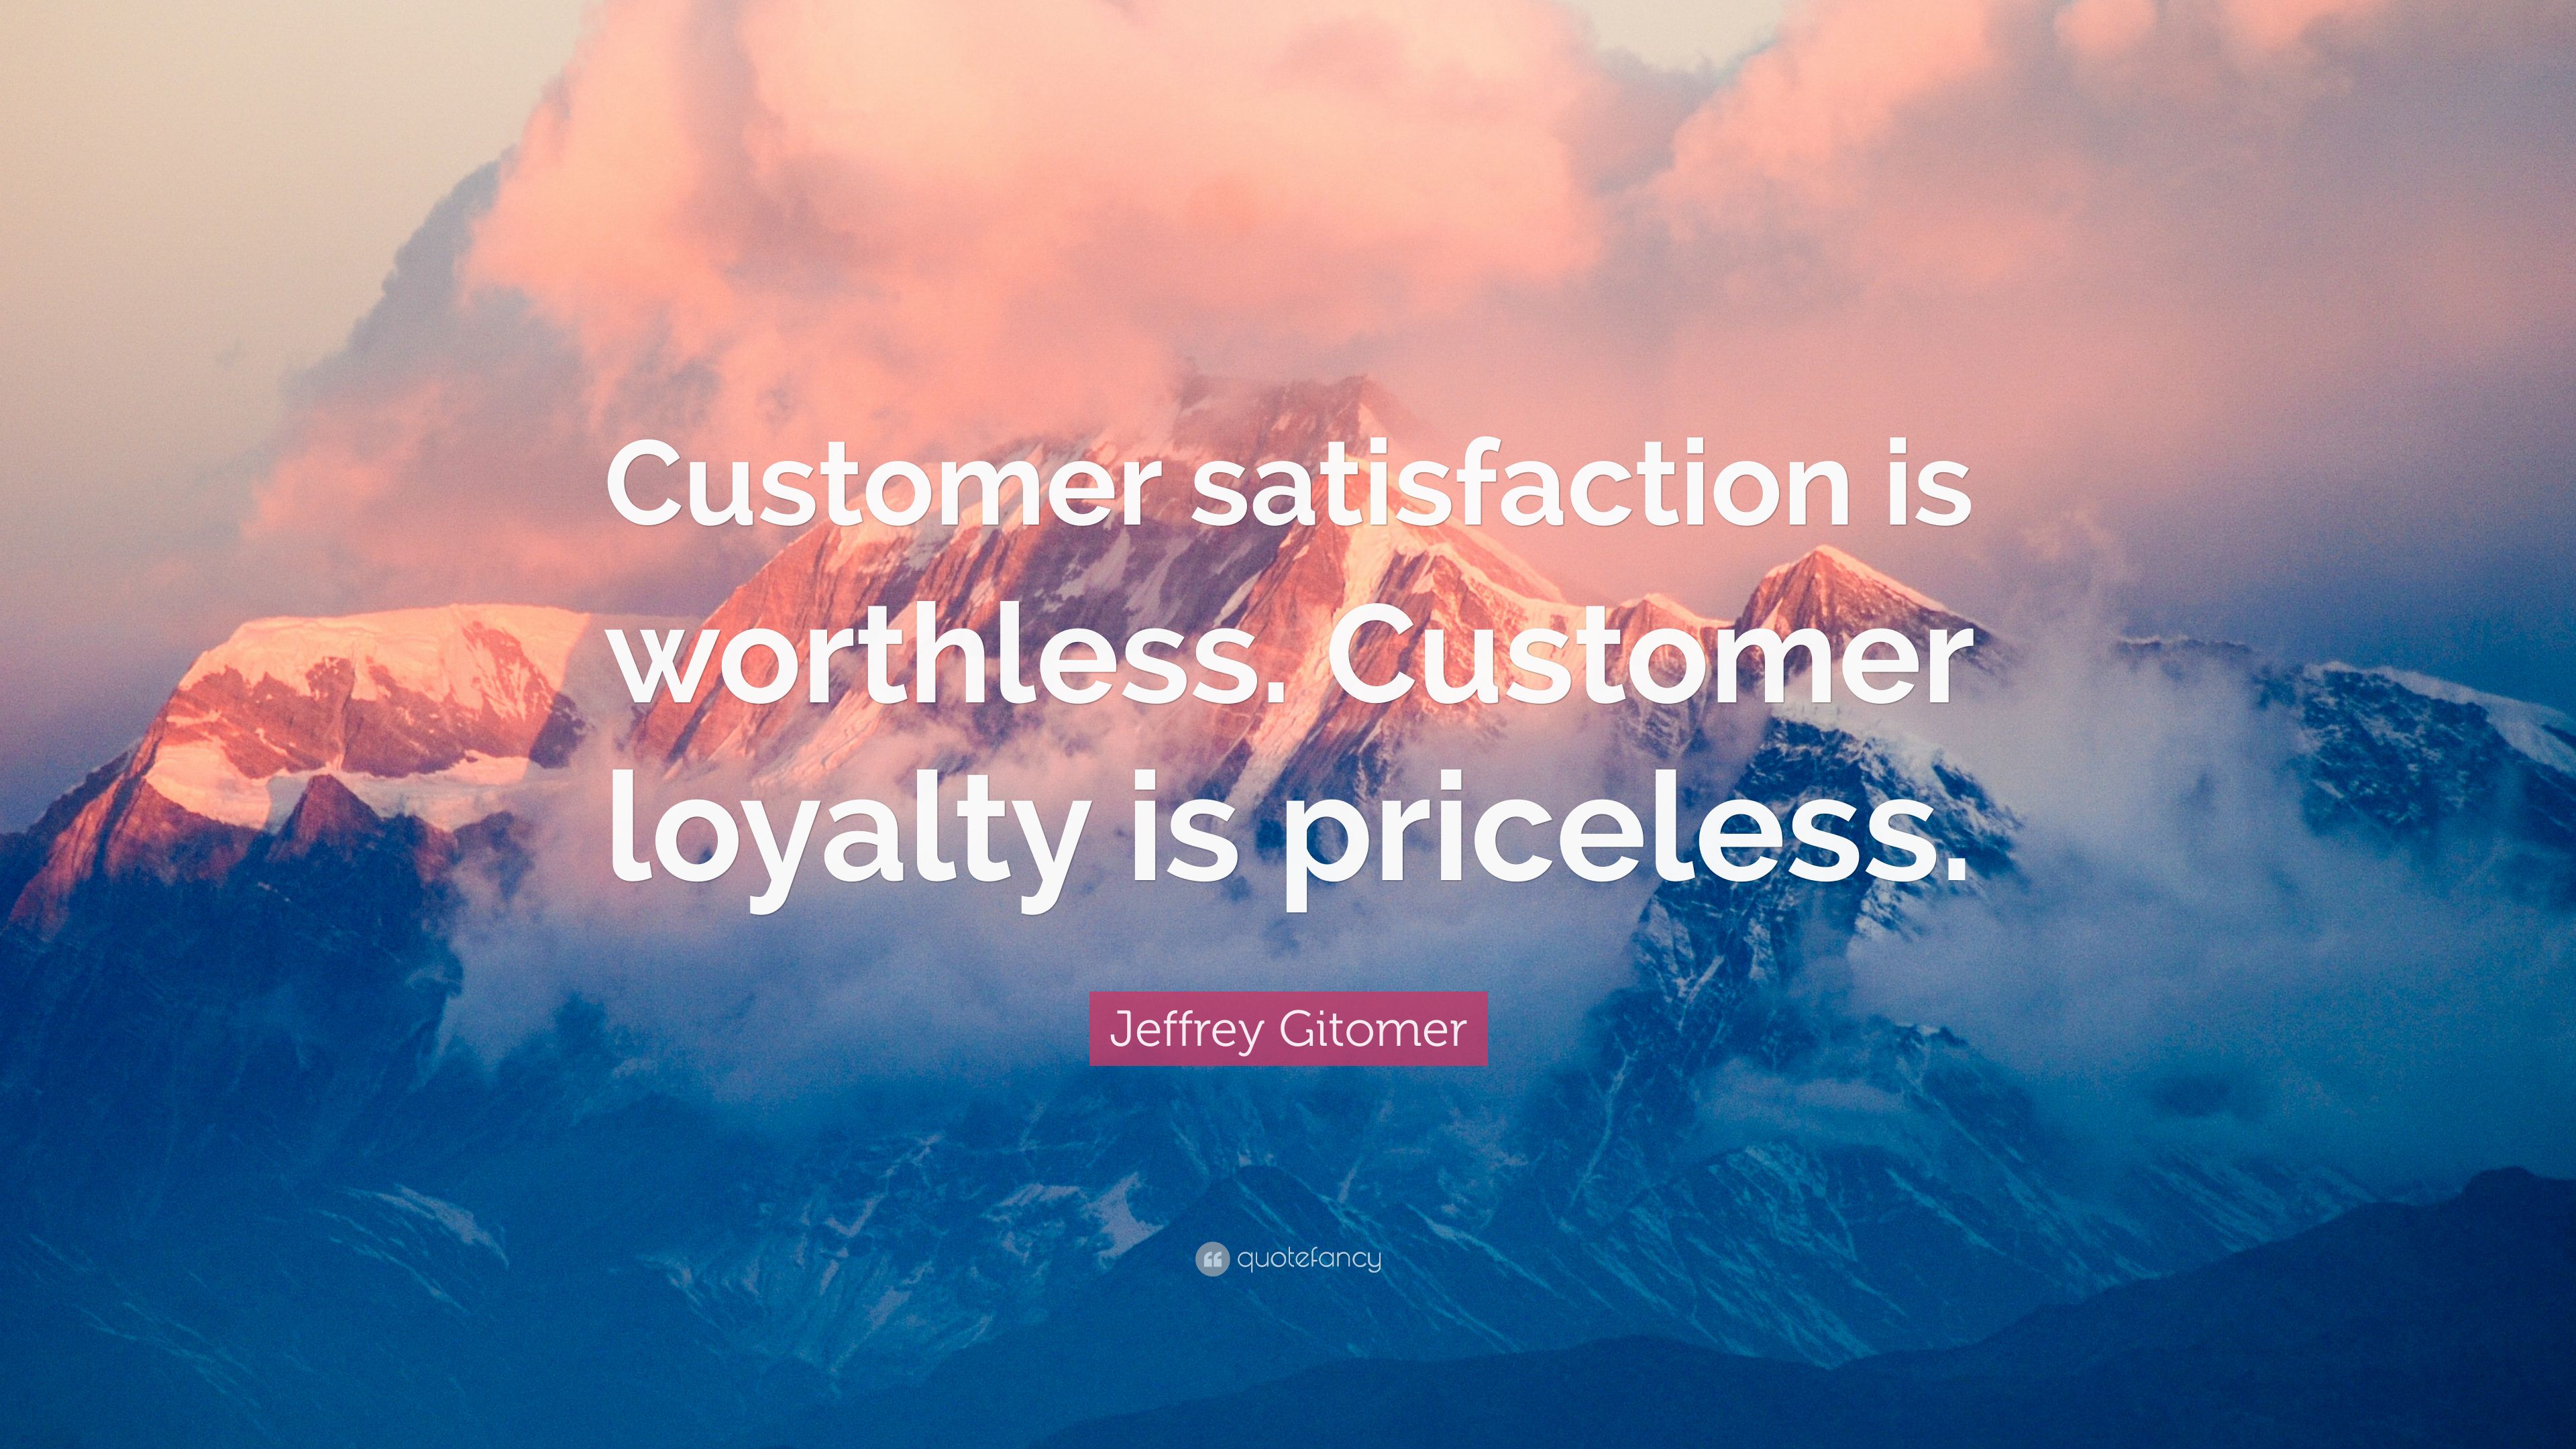 Jeffrey Gitomer Quote: “Customer satisfaction is worthless. Customer loyalty is priceless.” (9 wallpaper)